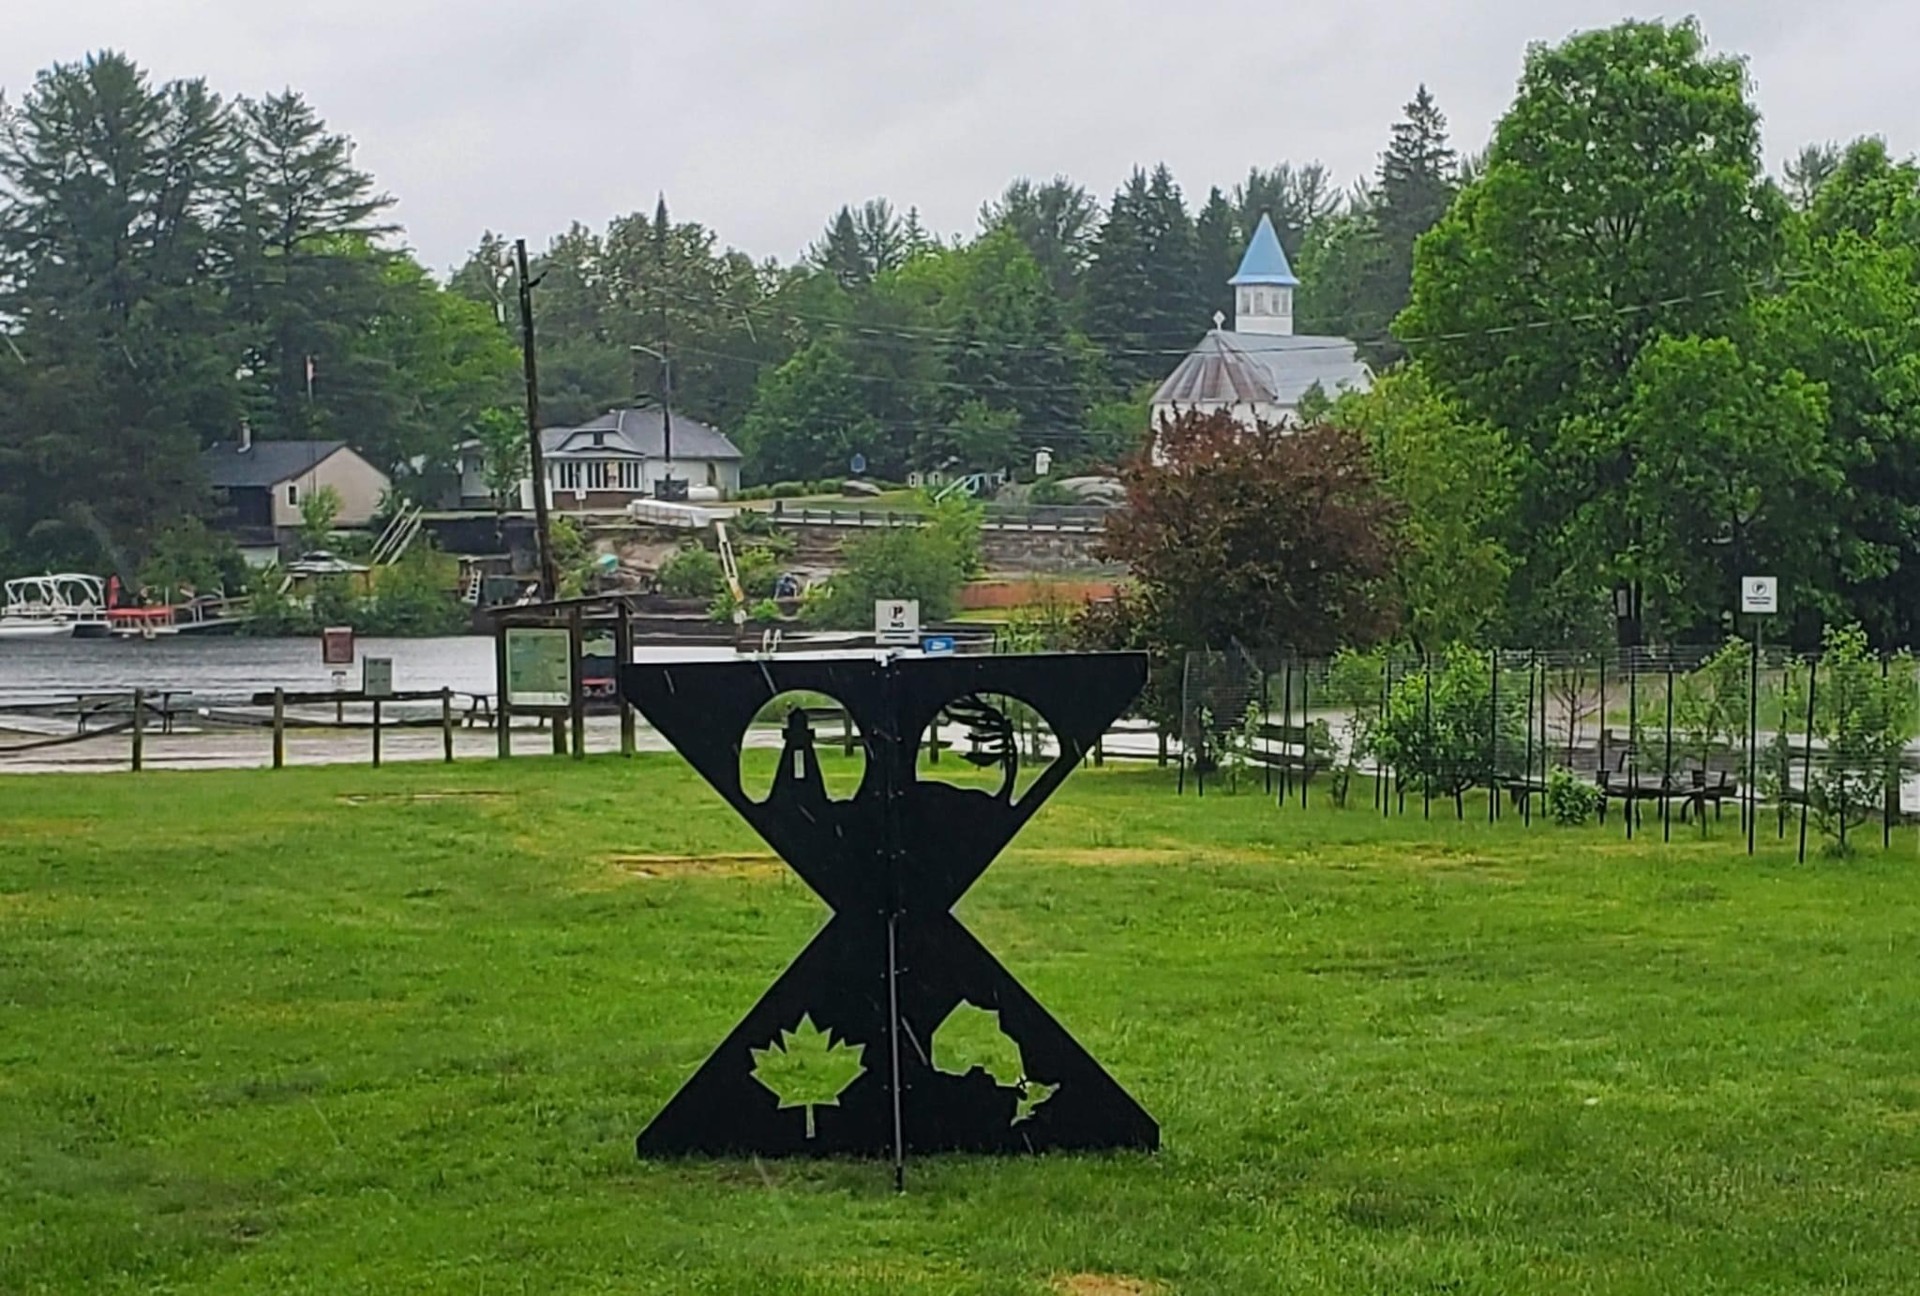 temporary installation entitled "X" Marks the Spot